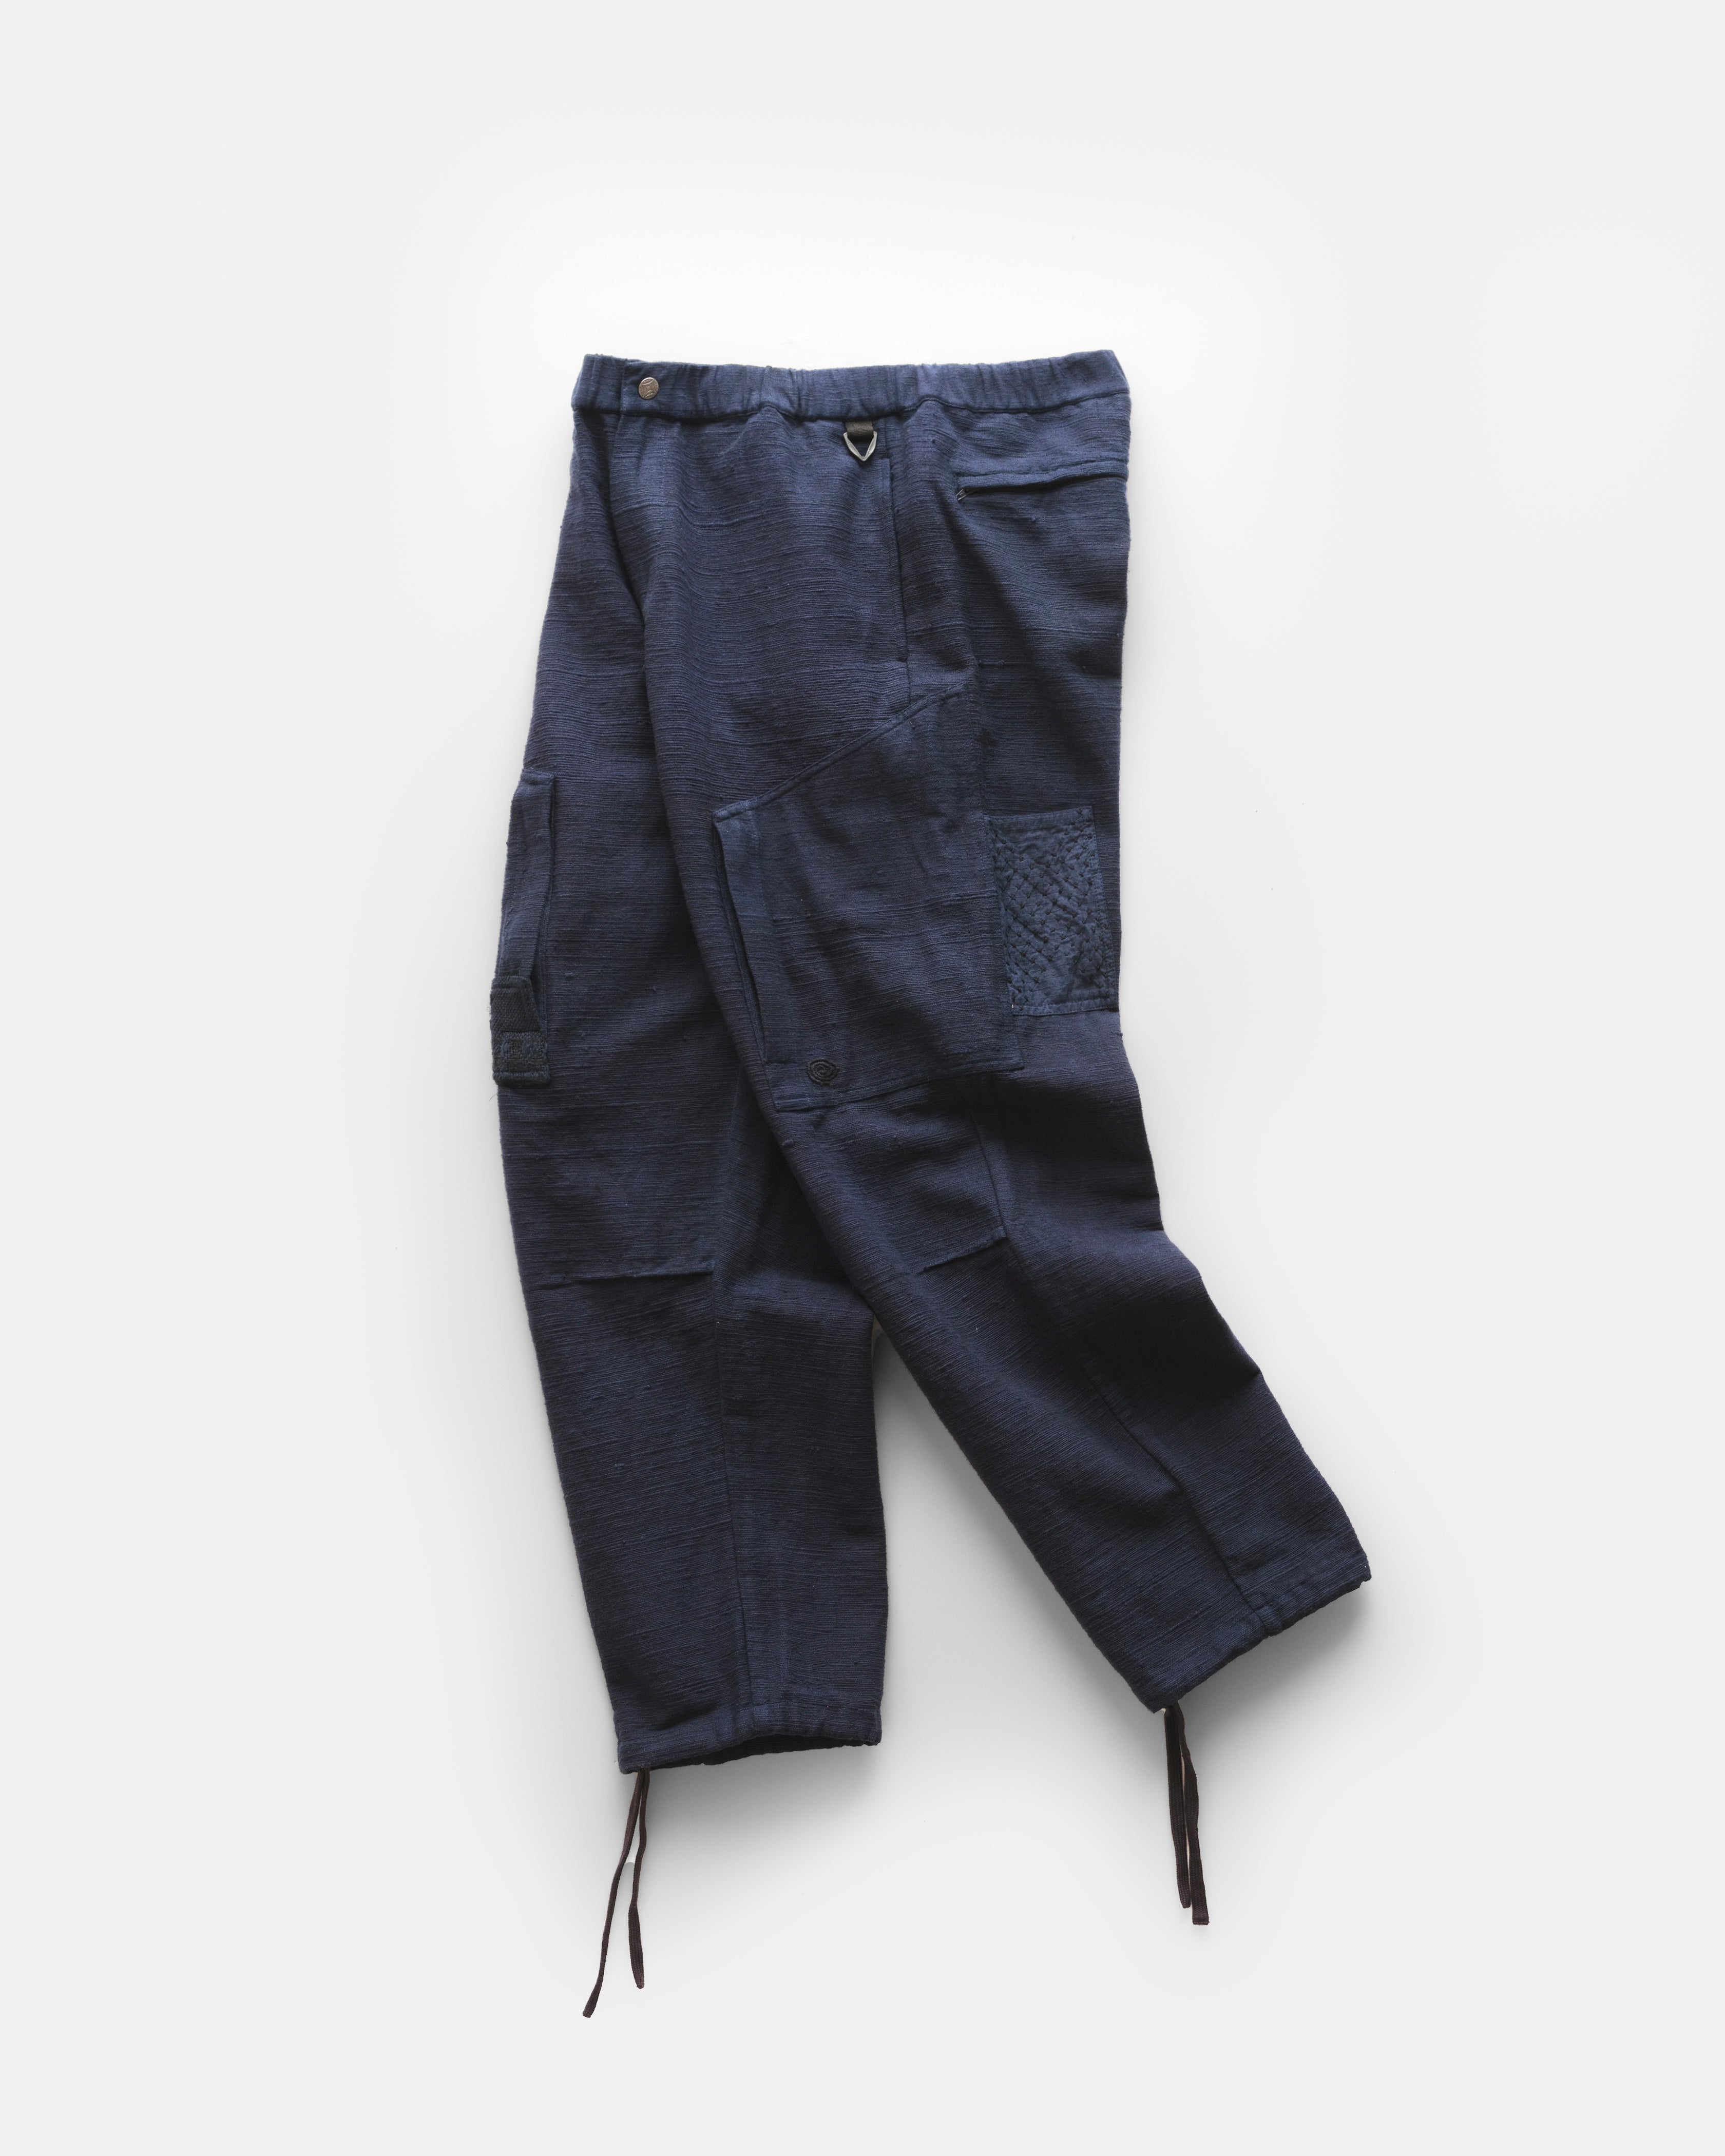 MENDED BENNY TRAIL PANT - MIDNIGHT NAVY KHADI COTTON – 18 East